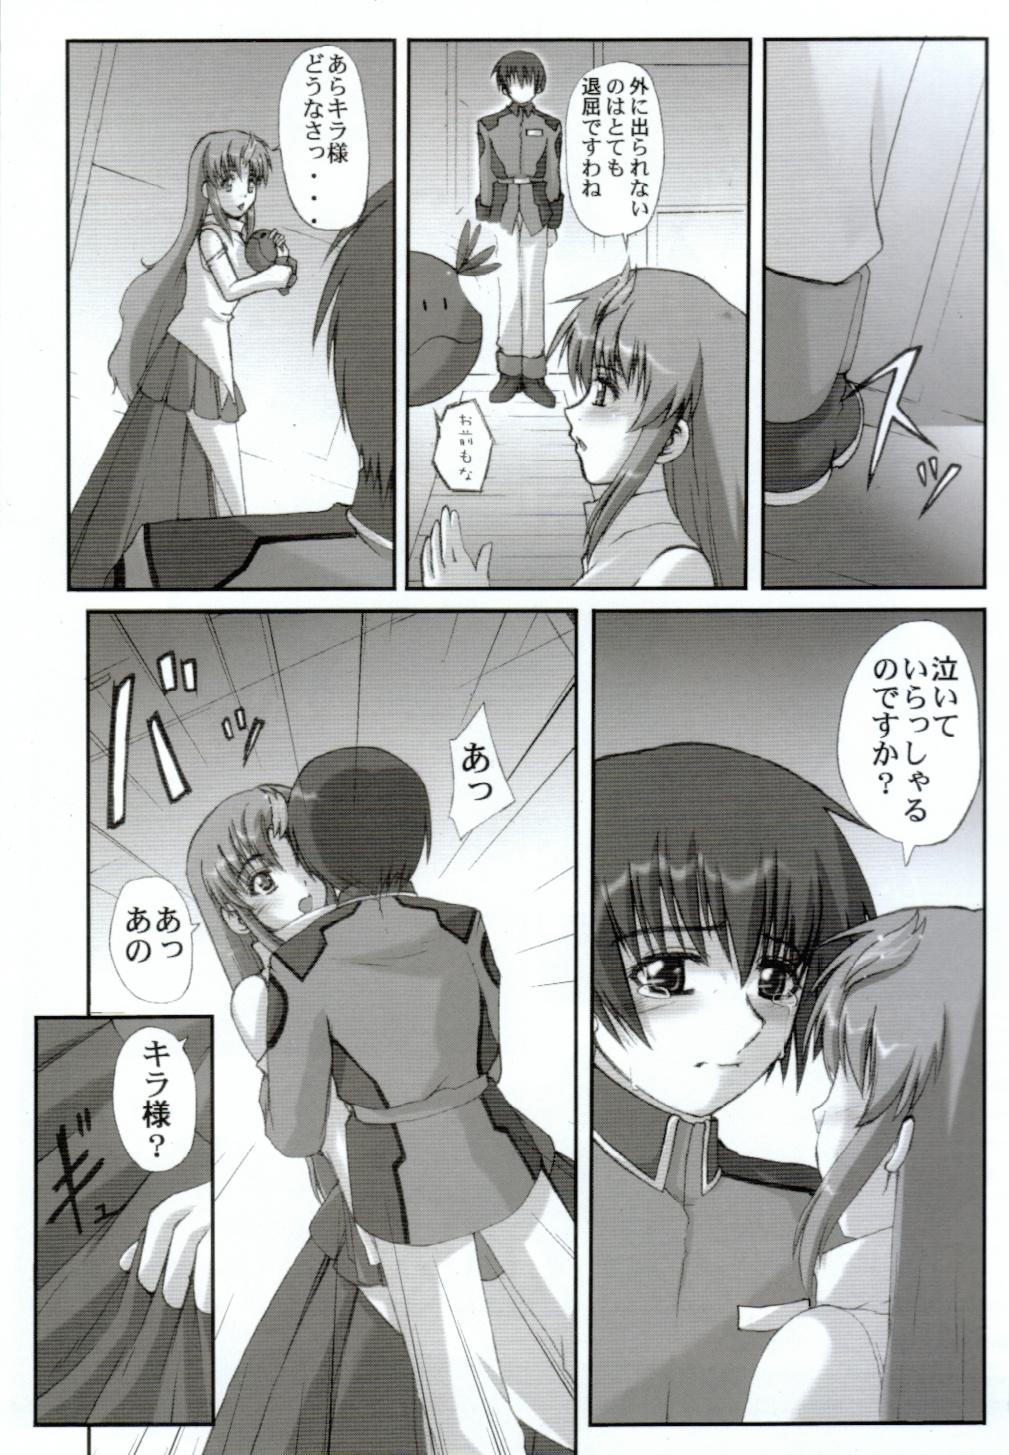 Best Blowjob My Milky Way - Gundam seed Colombia - Page 8